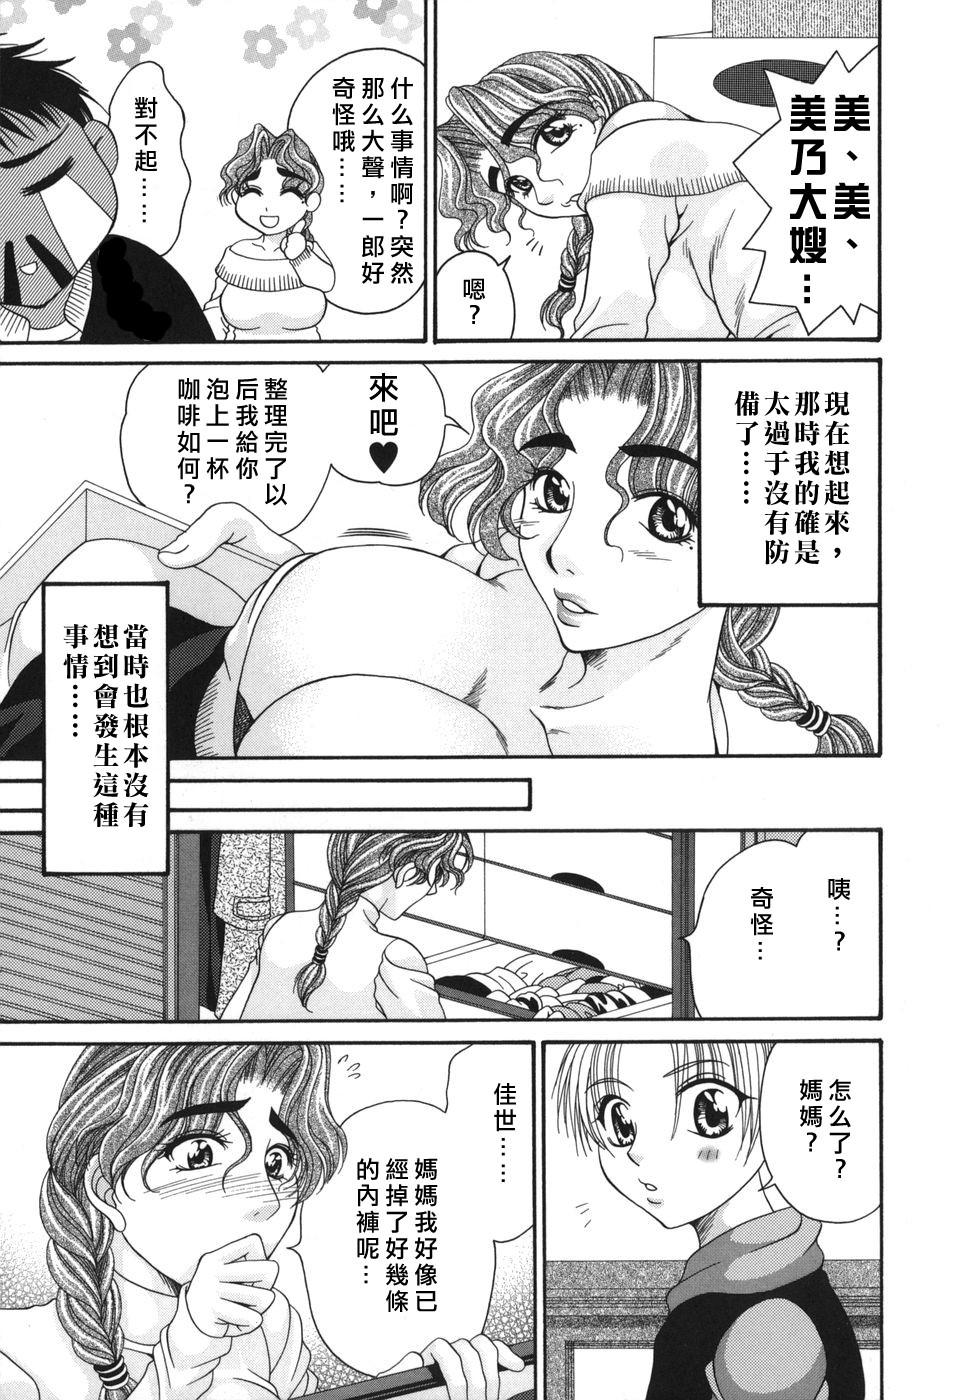 Rebolando [肉弾丸] 奥様はM(マゾ)!? Brunettes - Page 11